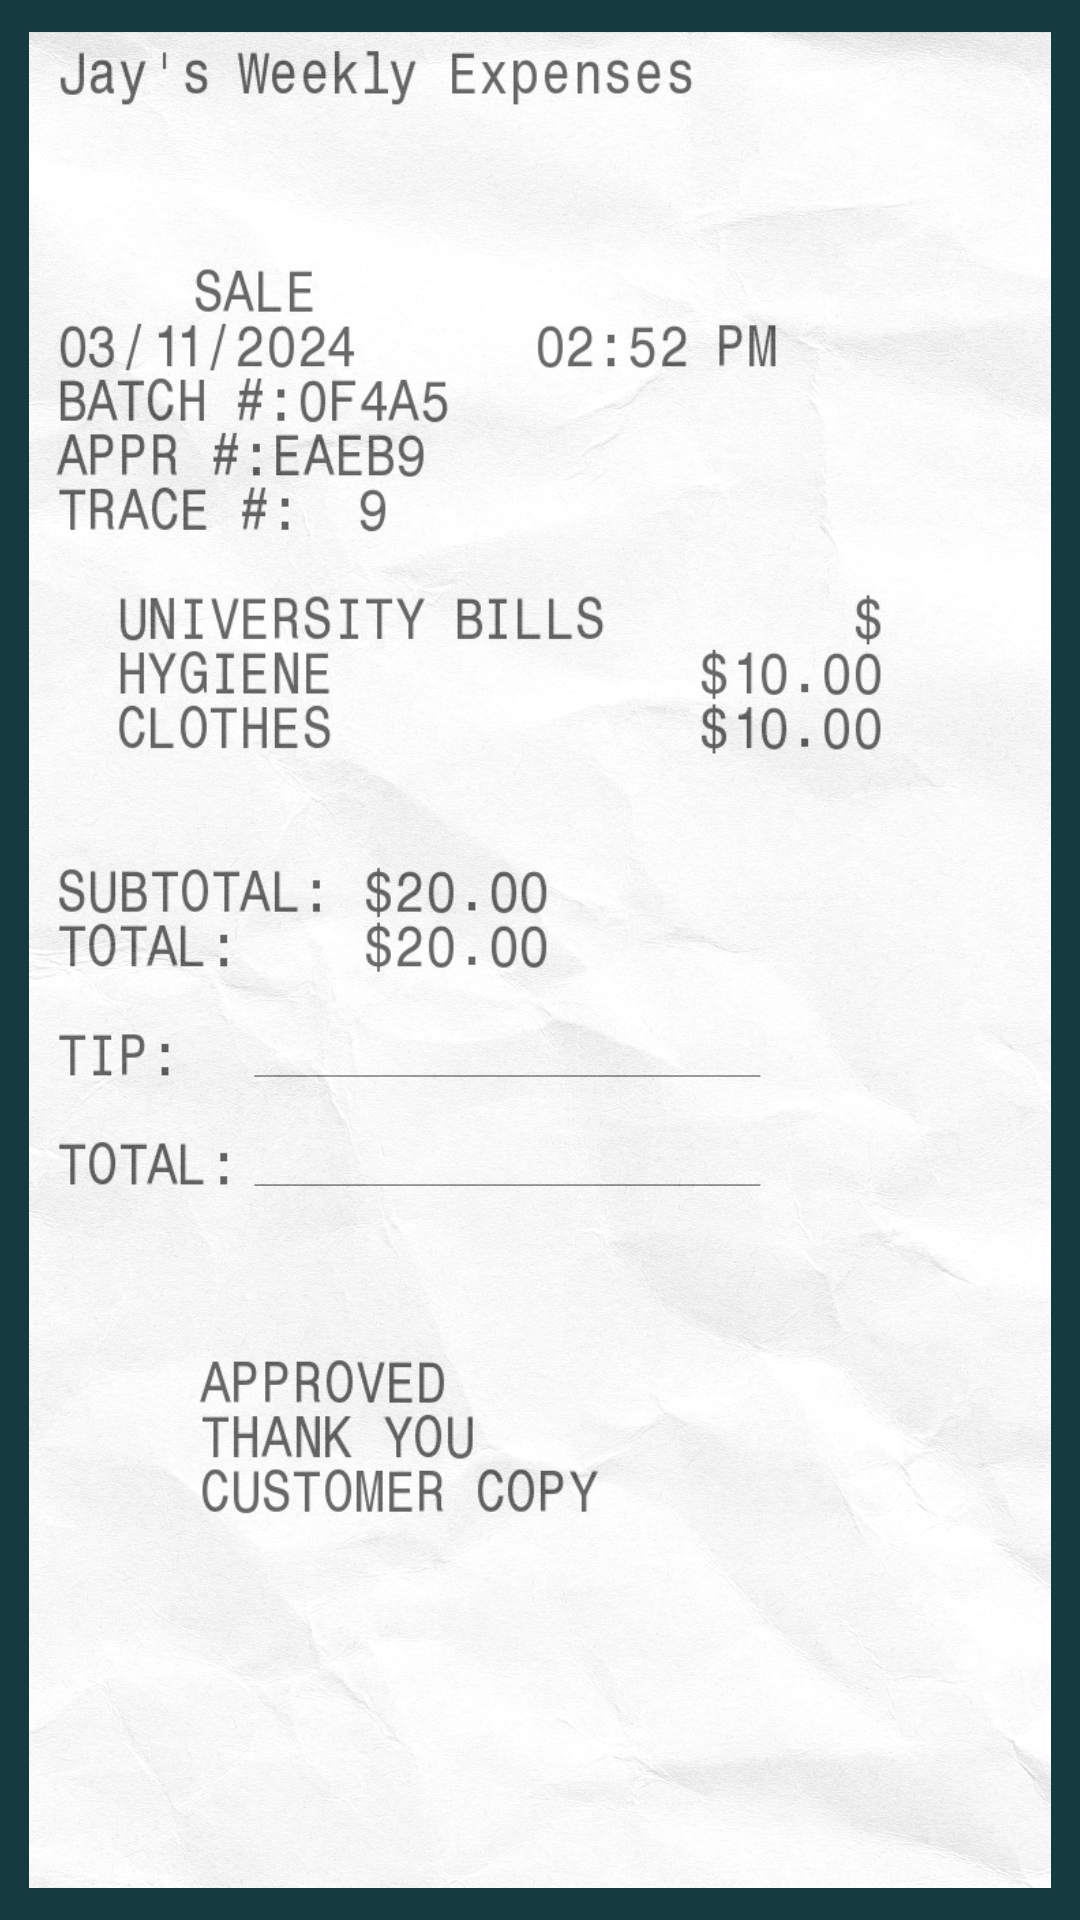 Receipt from University Hygiene Clothes showing a purchase total of $20.00 with an additional tip, date and time stamp, and &quot;APPROVED&quot; notice